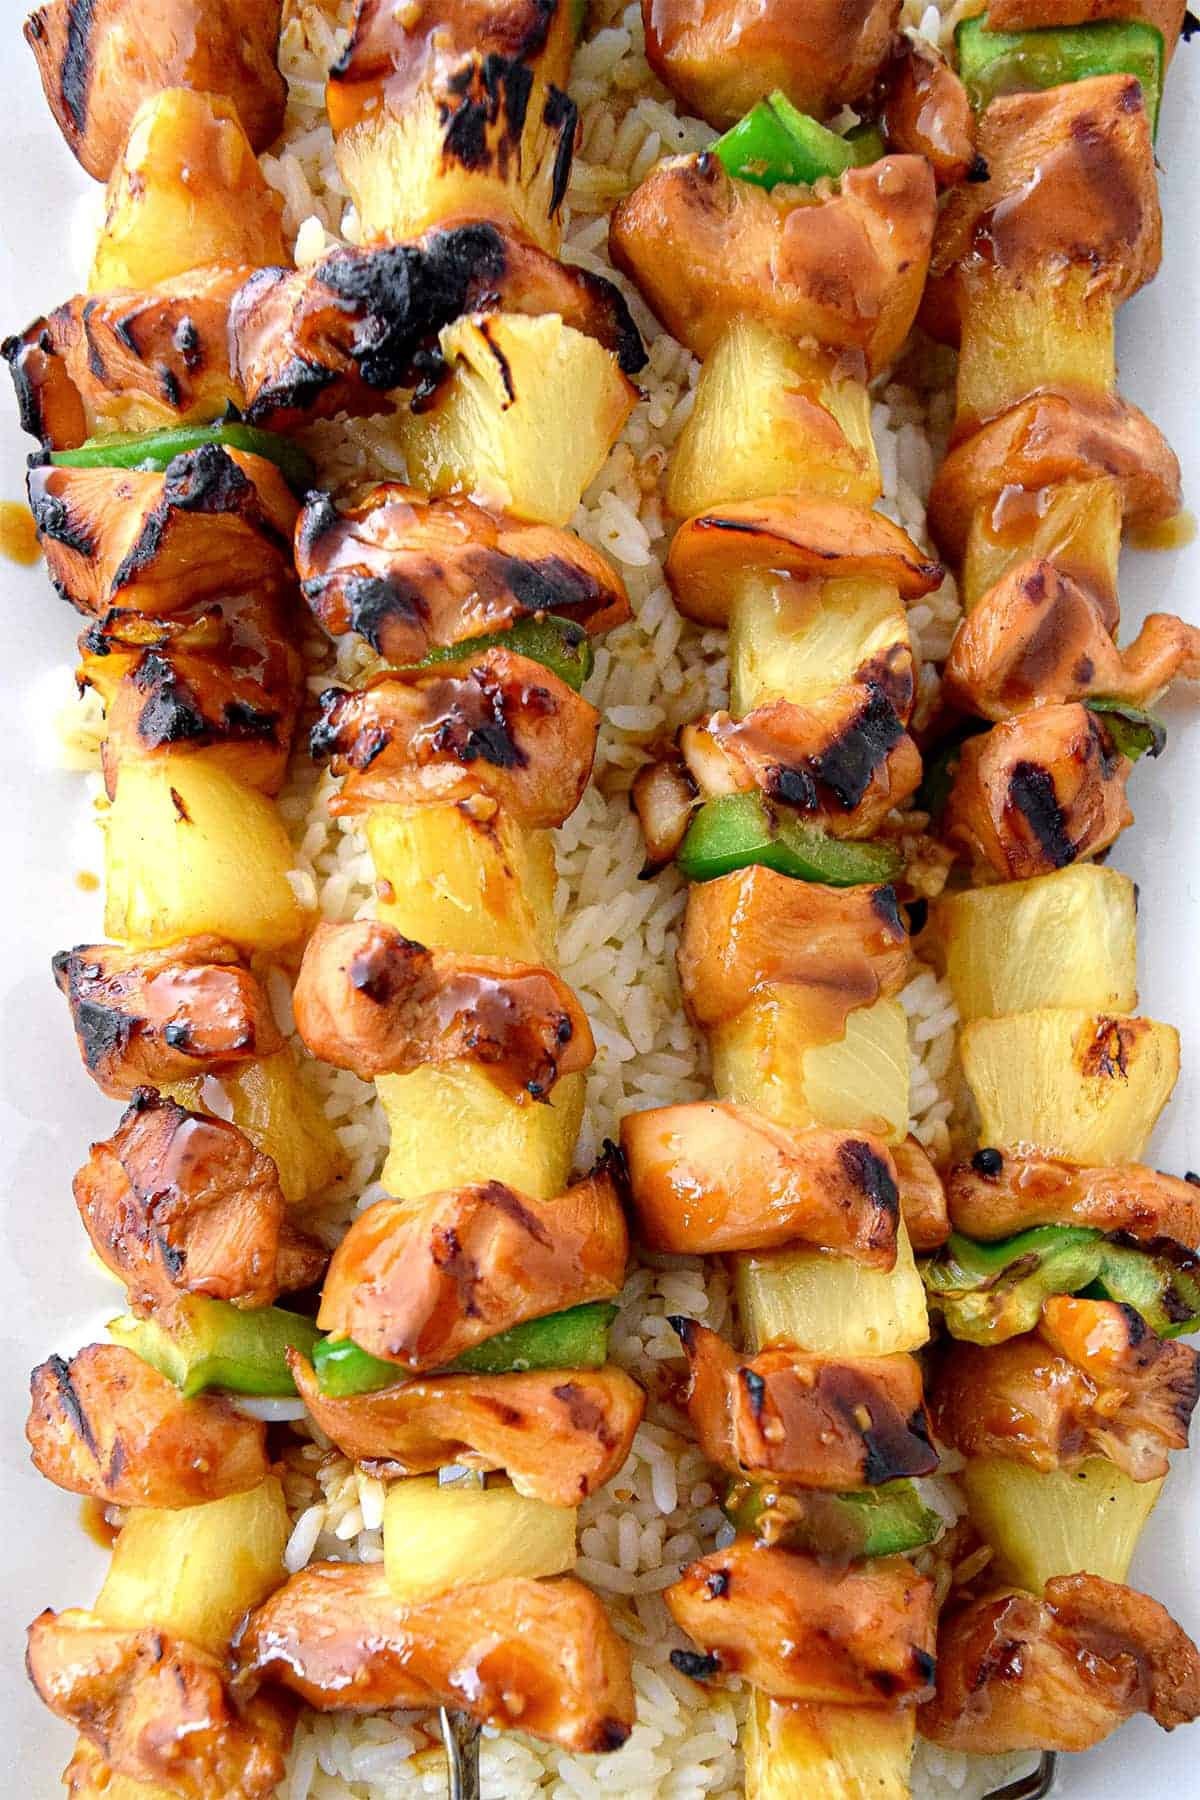 Teriyaki Chicken Kabobs overhead with pineapple and green peppers on a bed of rice.